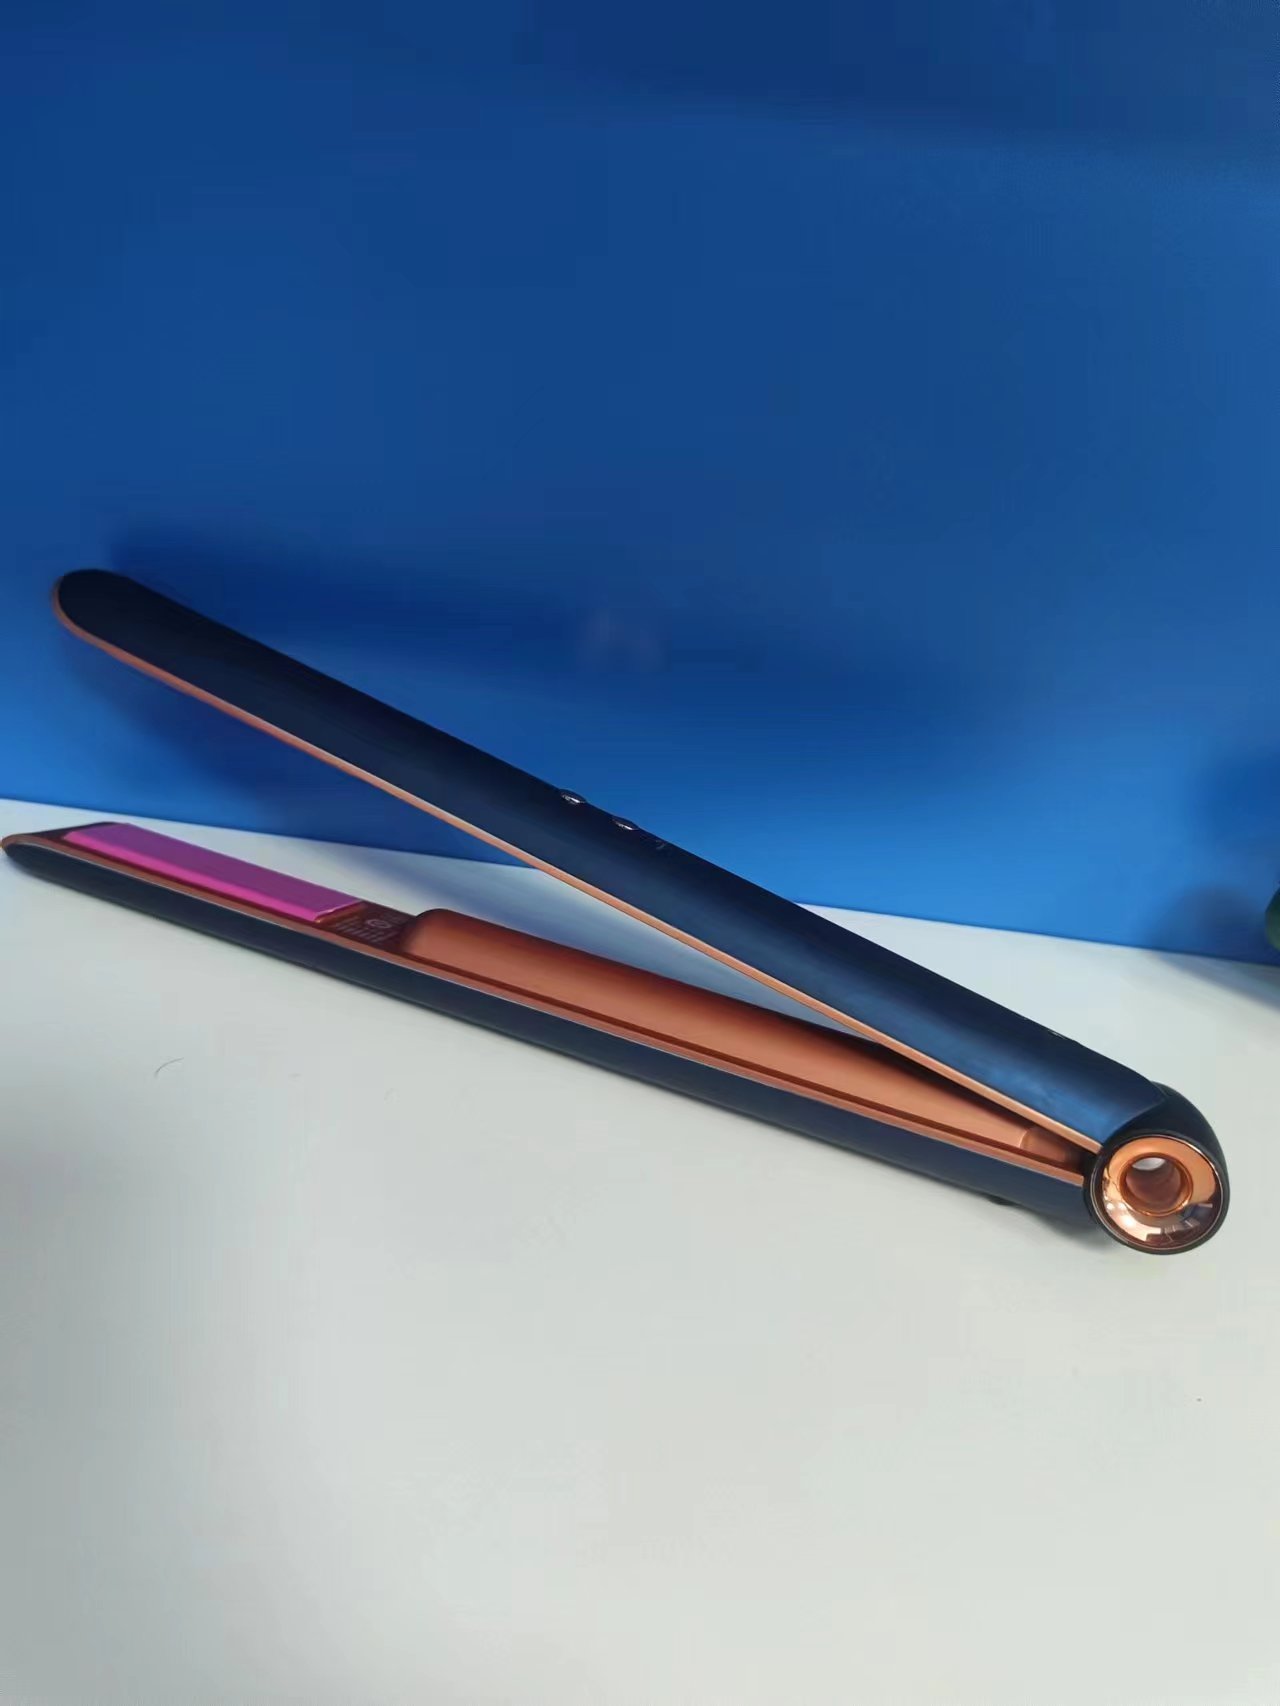 Wireless Curler and Straightener: A 2-in-1 Beauty Tool for Different Hairstyles